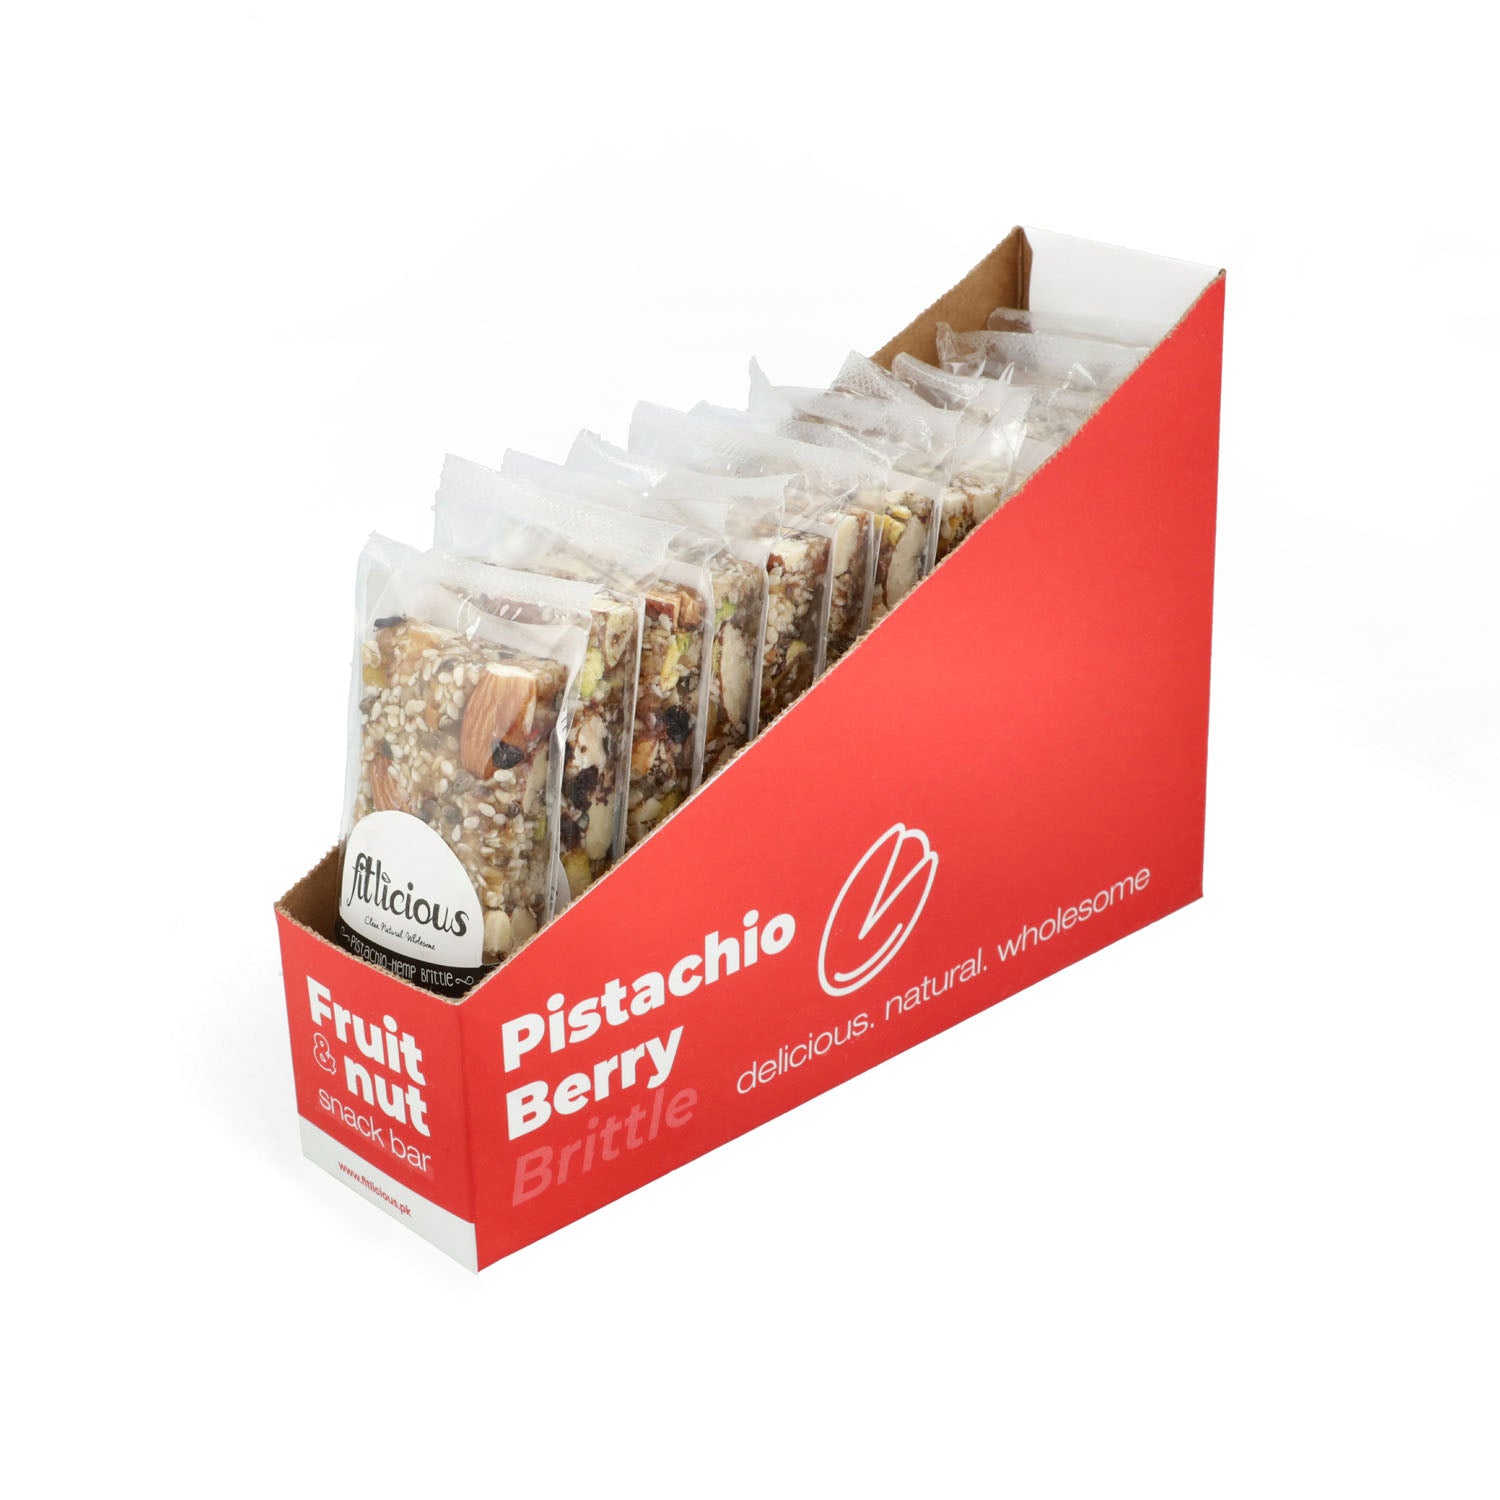 Bundle of 2  - Buy any two Nut Bar boxes (box of 12) of your choice